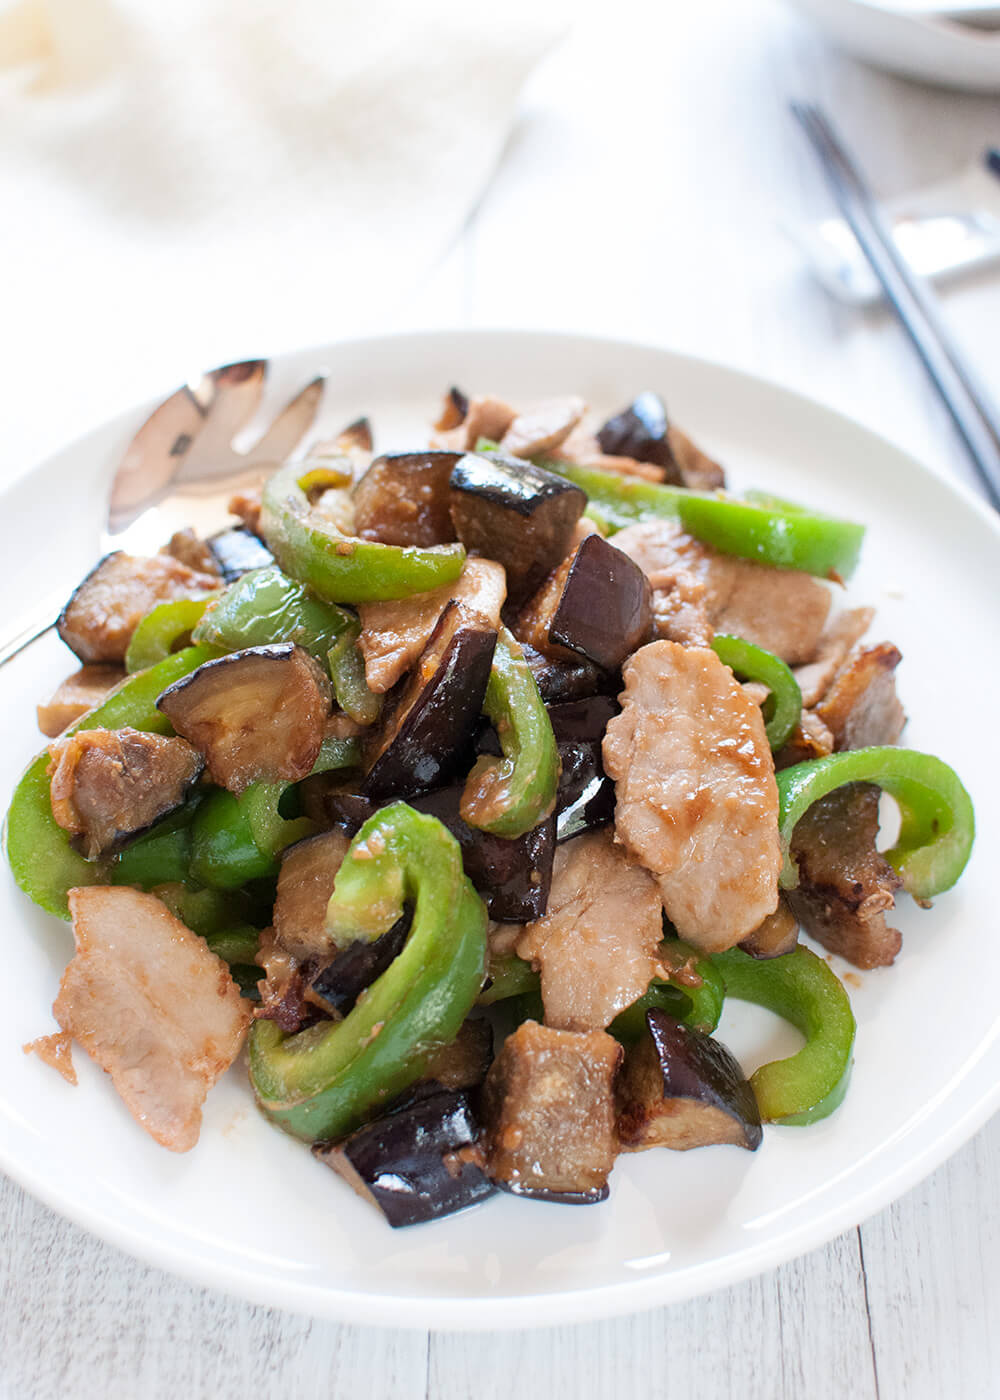 This is a quick side dish. Eggplant goes so well with miso and green capsicum adds bright colour to the dish. My recipe uses thinly sliced pork but you can make it without meat. Then it becomes a vegetarian dish.